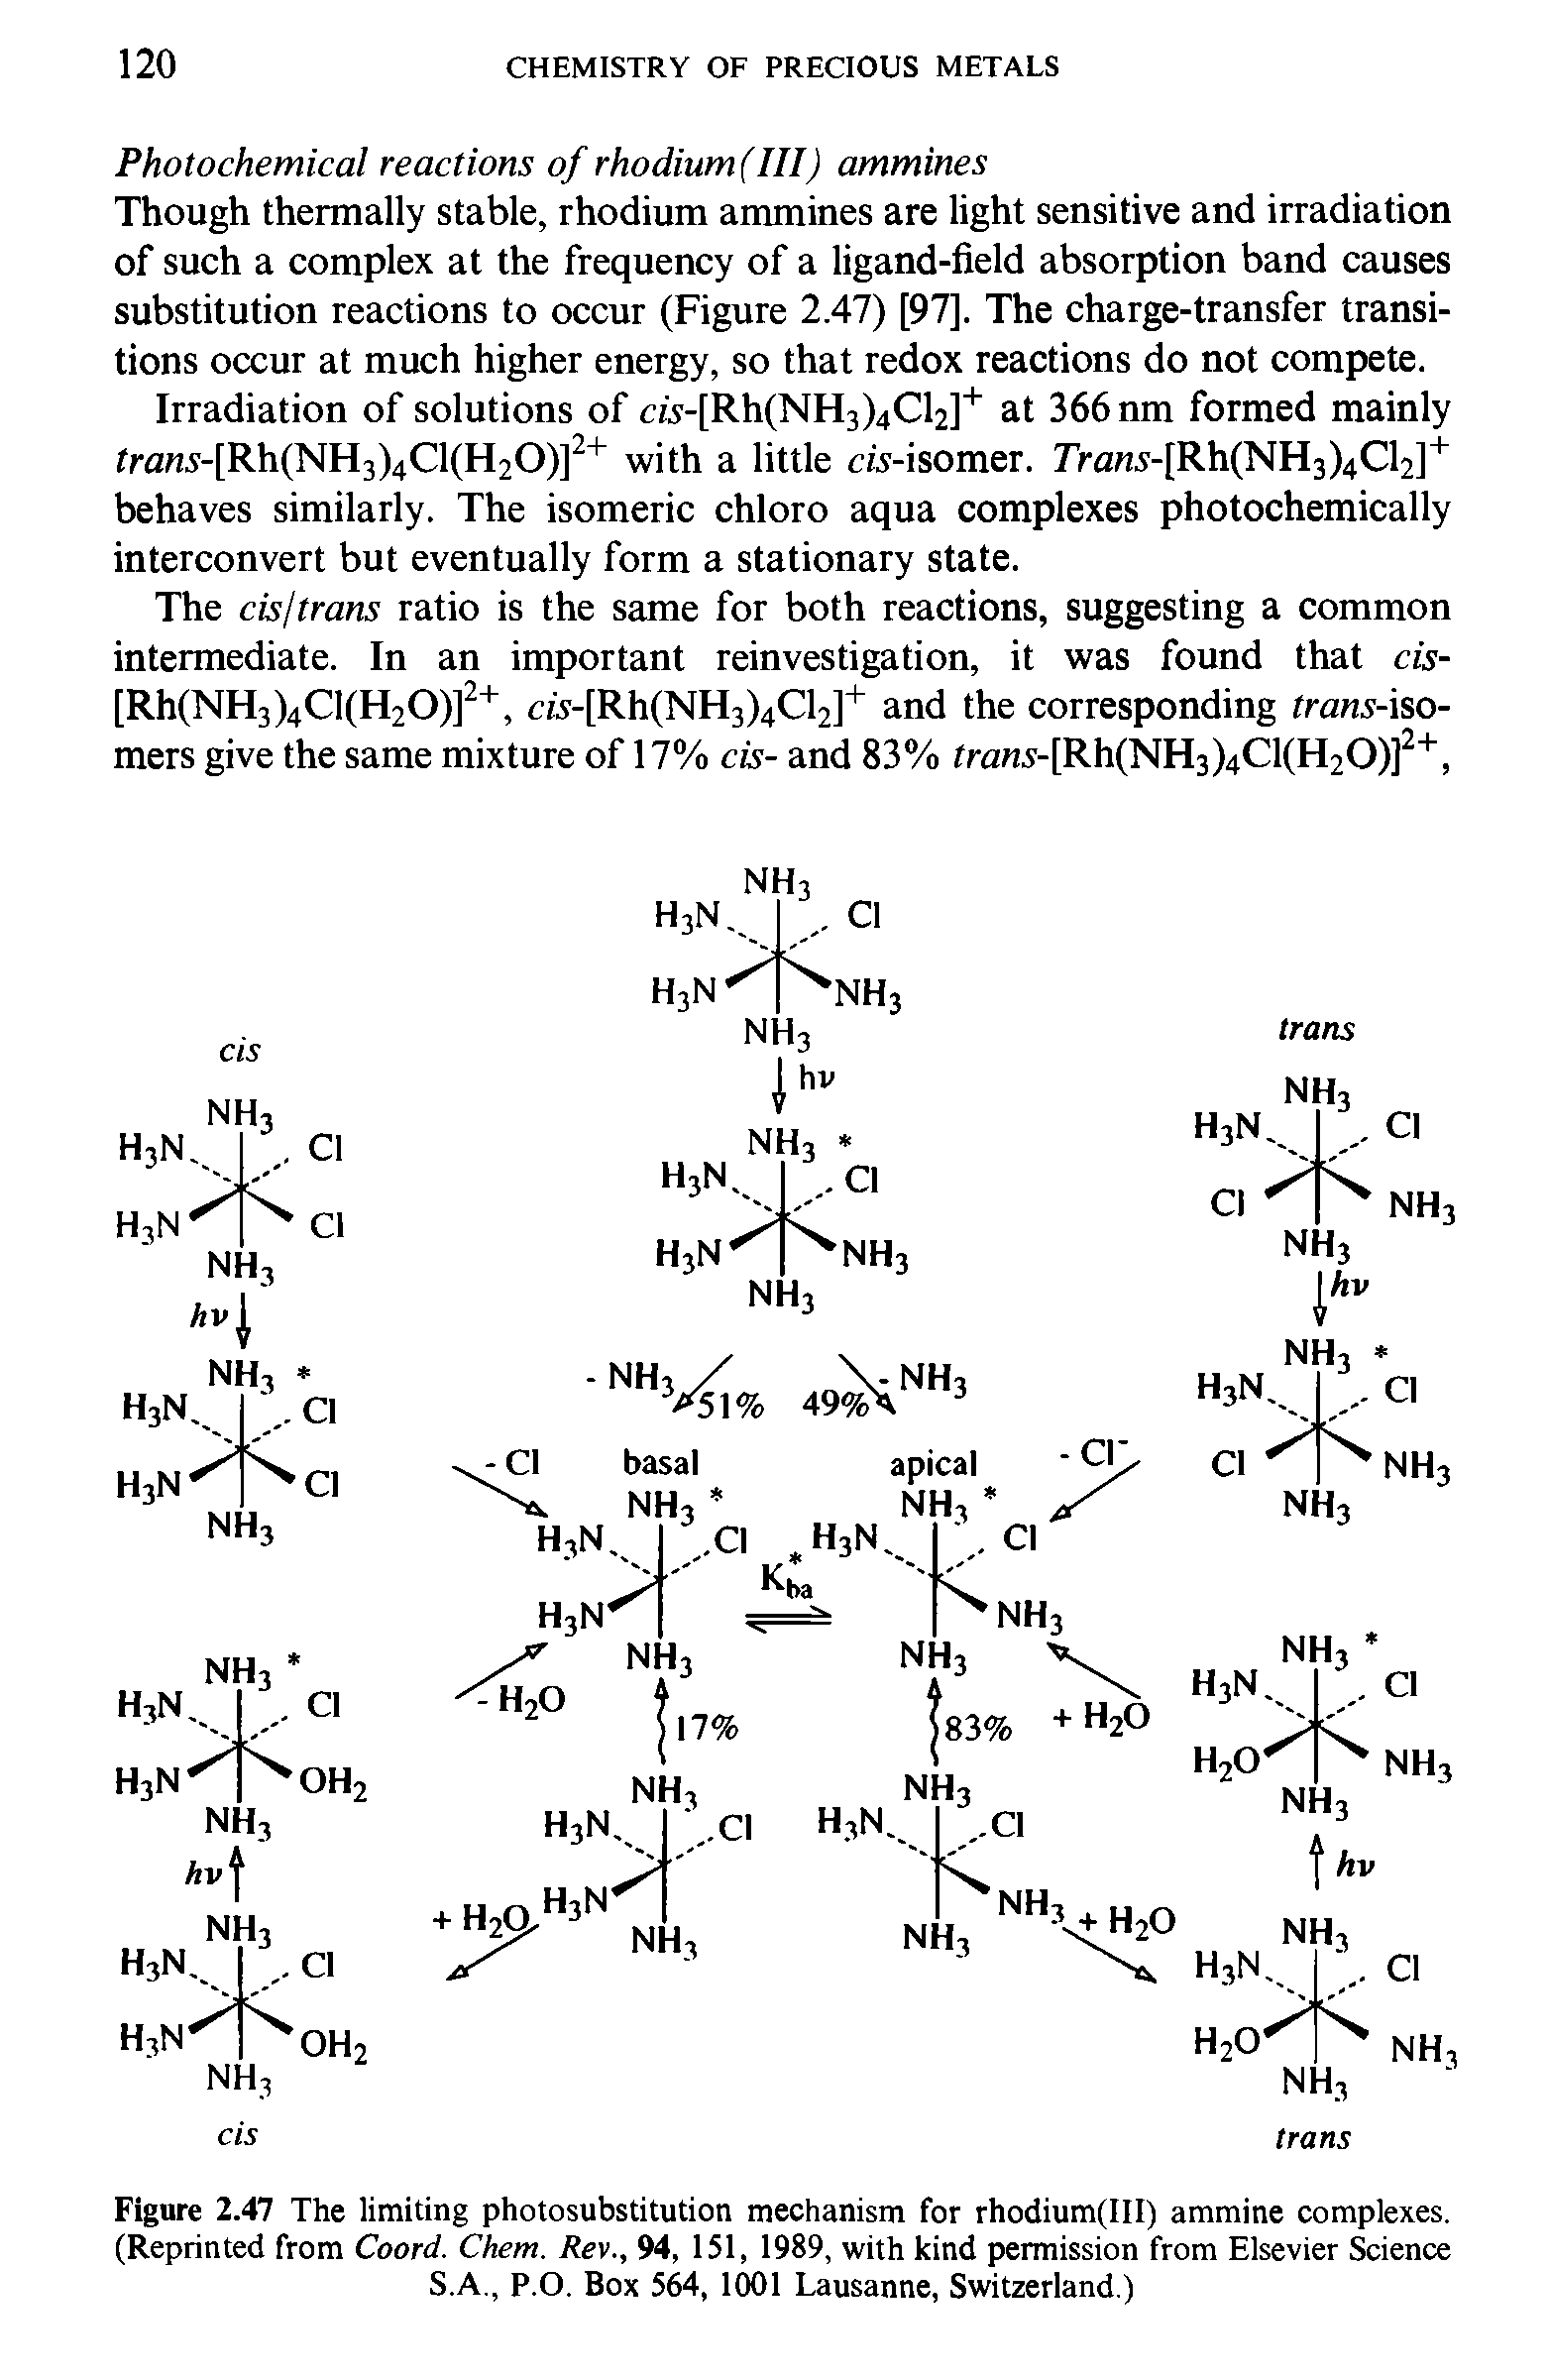 Figure 2.47 The limiting photosubstitution mechanism for rhodium(III) ammine complexes. (Reprinted from Coord. Chem. Rev., 94, 151, 1989, with kind permission from Elsevier Science S.A., P.O. Box 564, 1001 Lausanne, Switzerland.)...